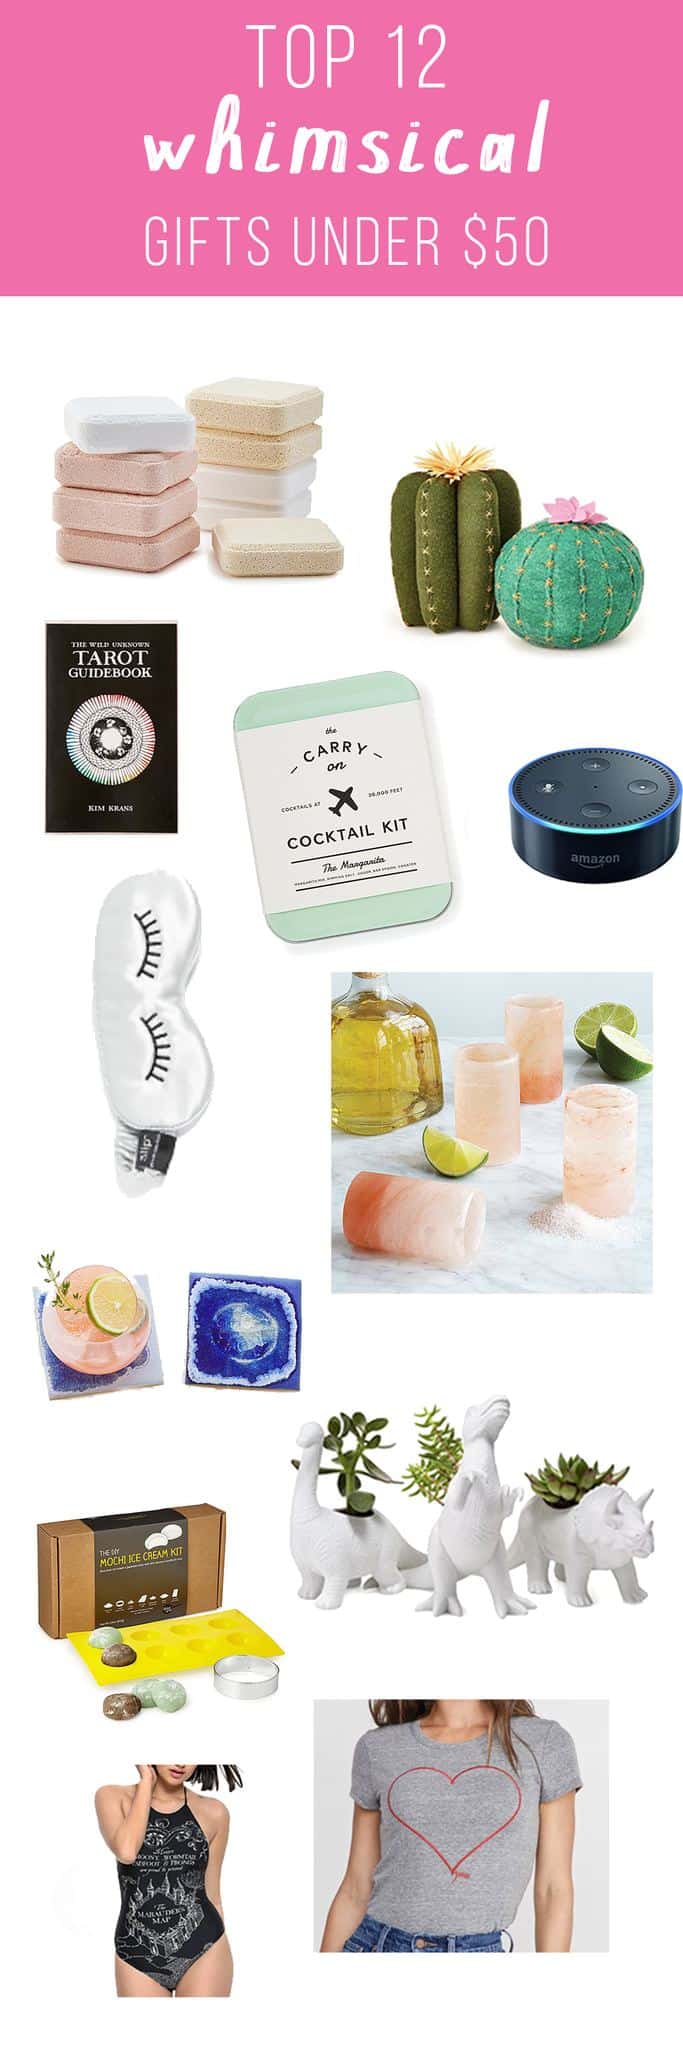 Gift Ideas Under $50 - wit & whimsy